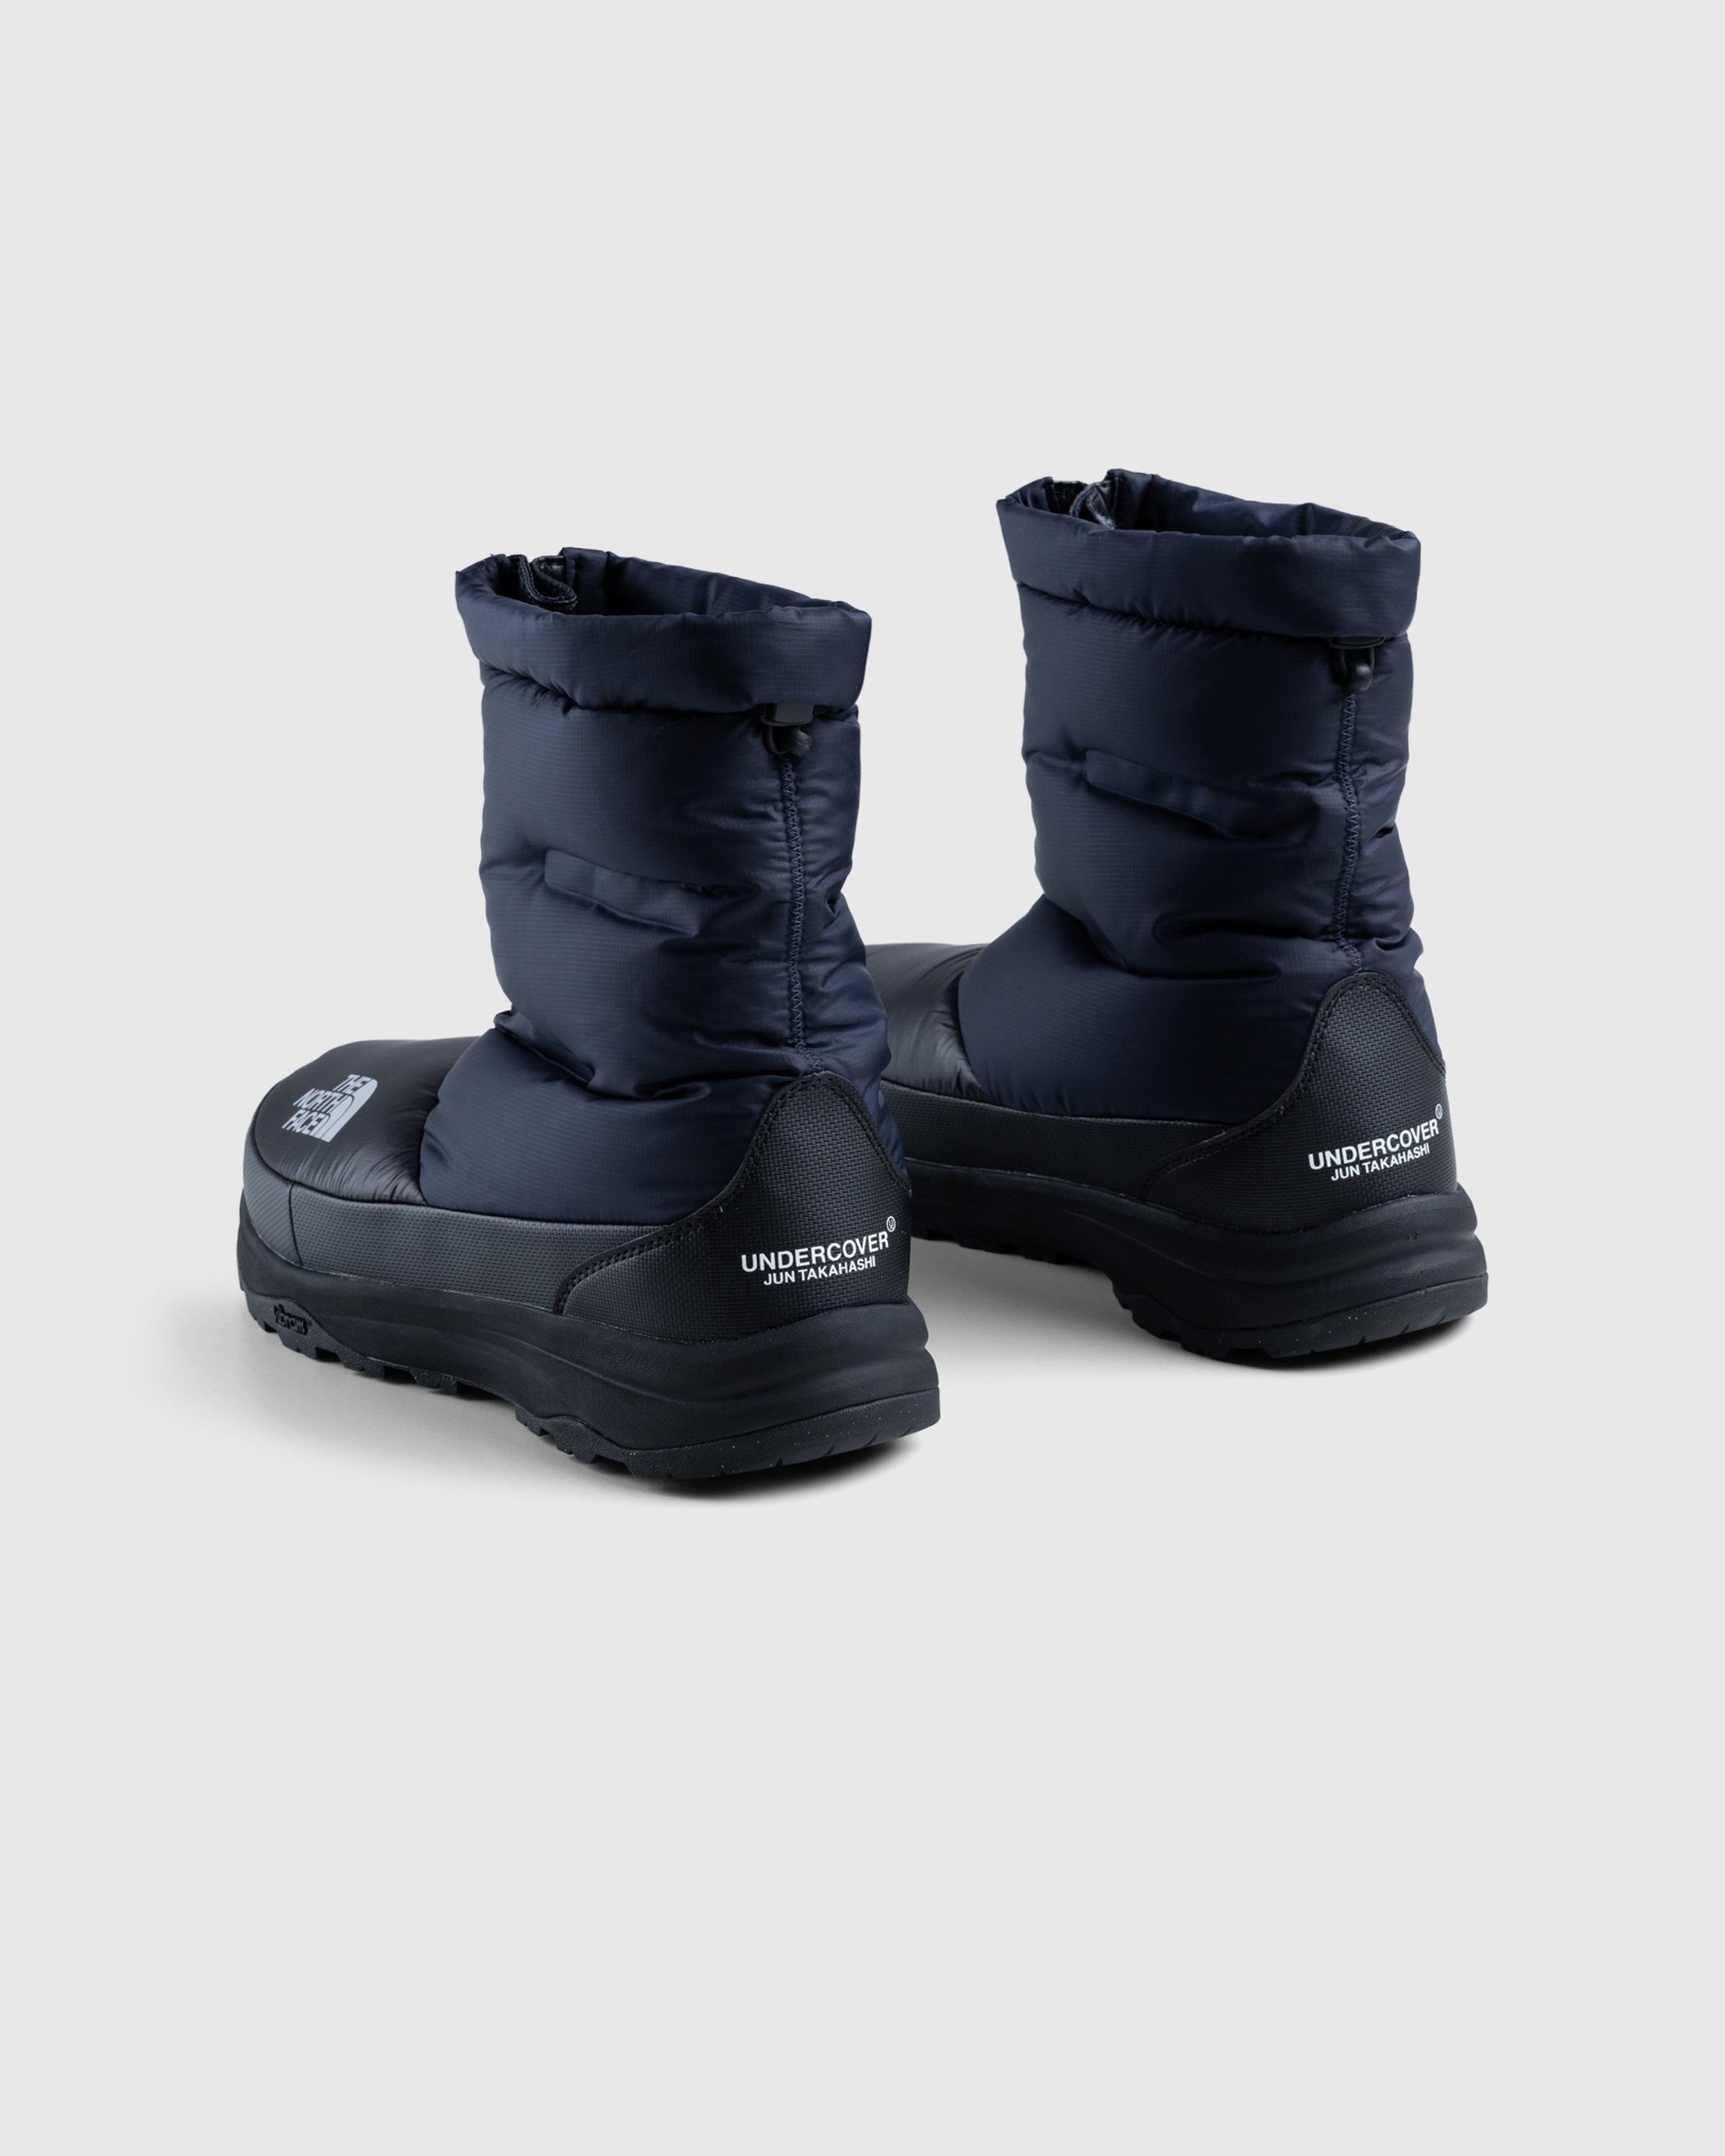 The North Face x UNDERCOVER - DOWN BOOTIE - Footwear - Multi - Image 4